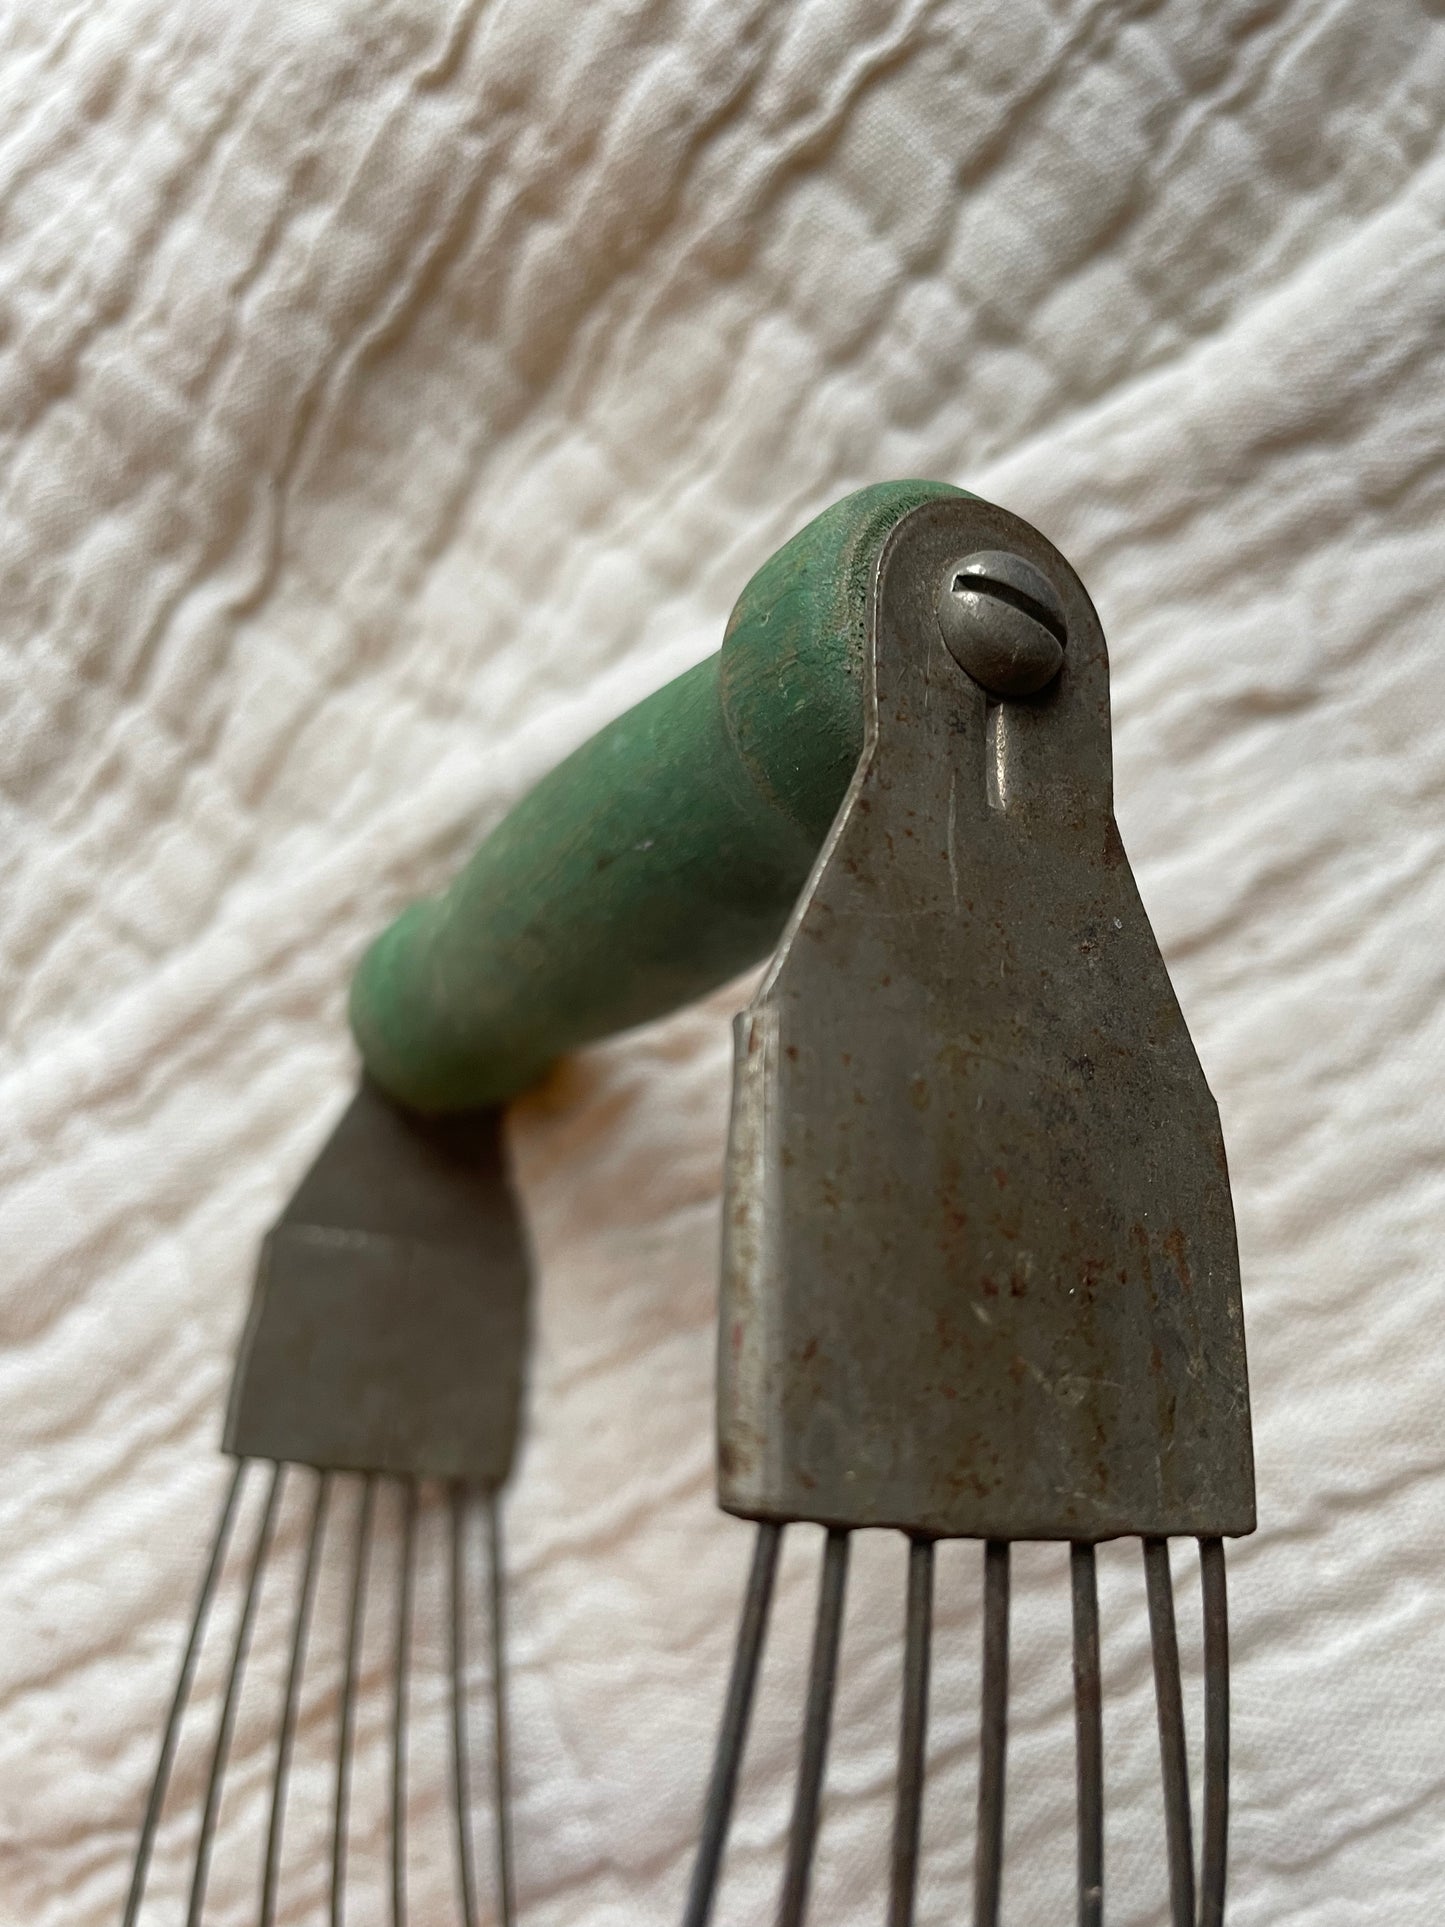 Vintage Masher with Green Handle